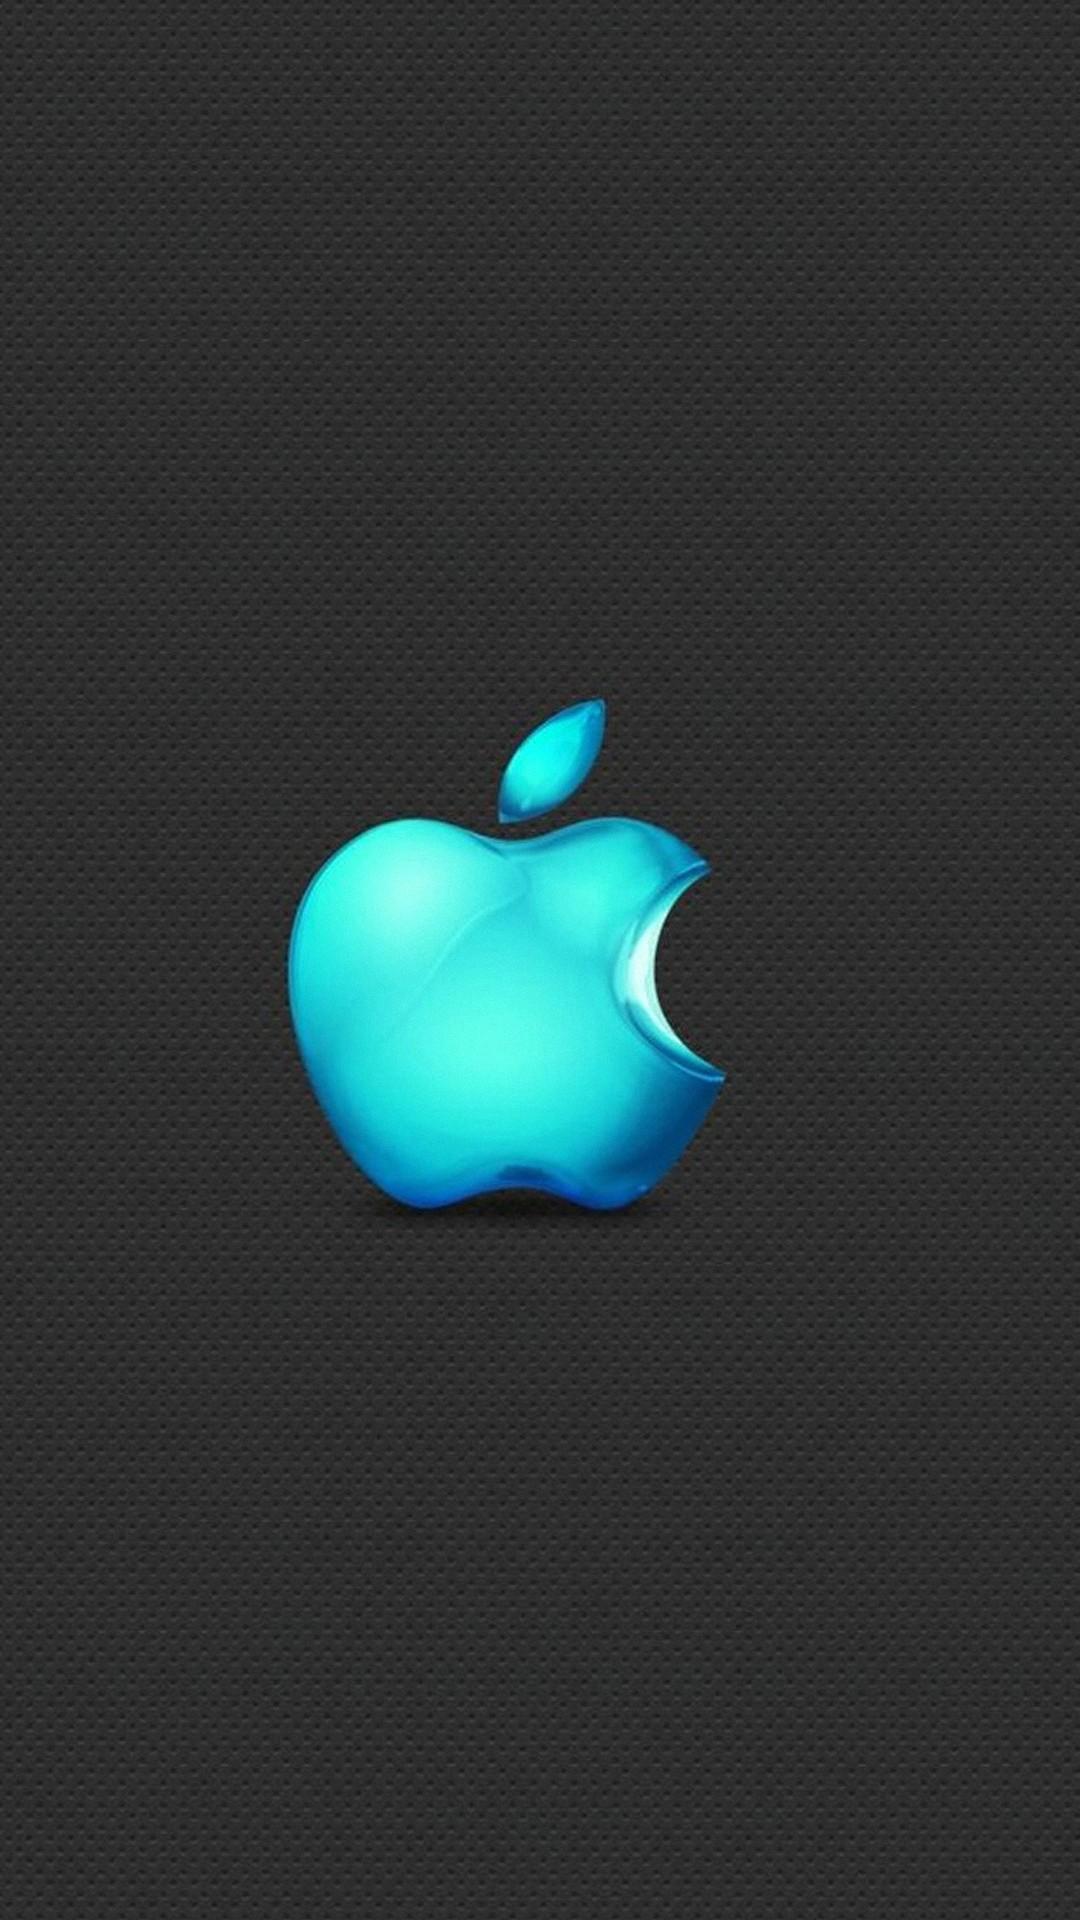 1080x1920 Apple iPhone Wallpapers - Wallpaper Cave